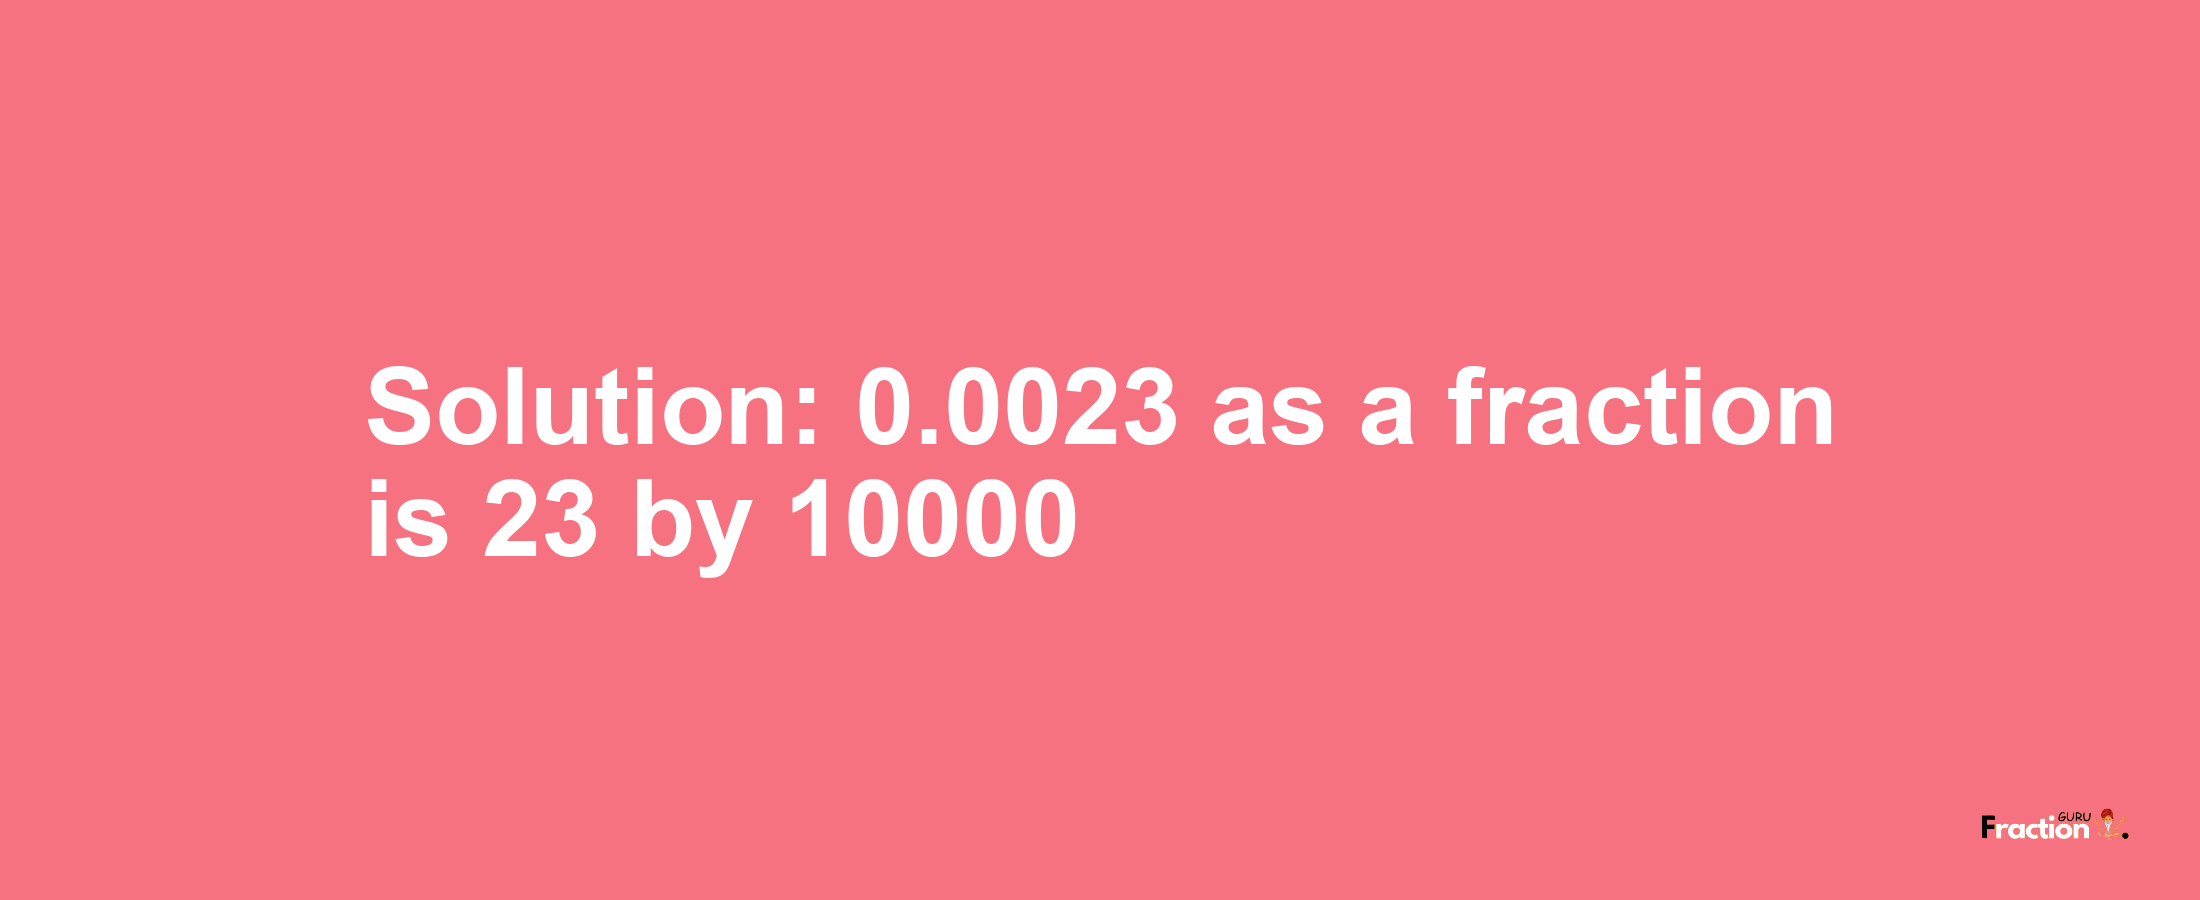 Solution:0.0023 as a fraction is 23/10000